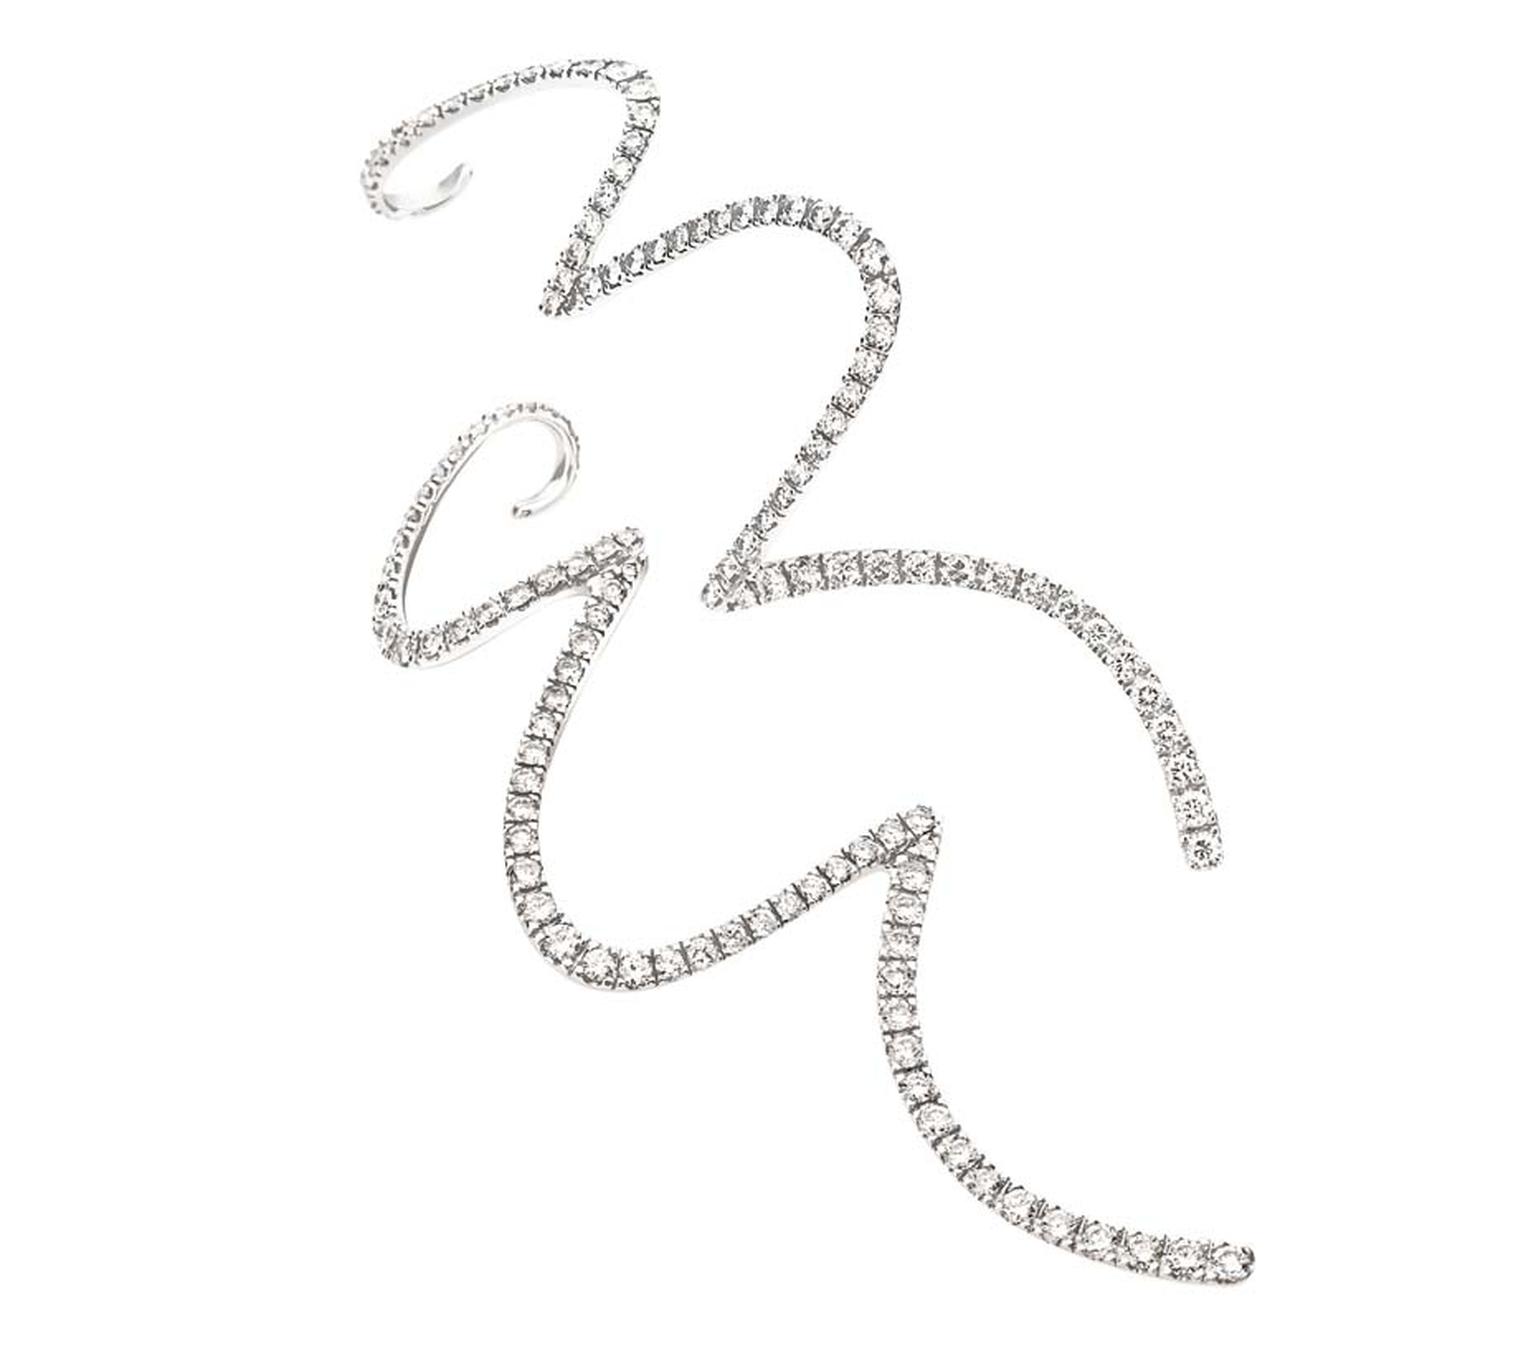 H.Stern's 2008 Oscar Niemeyer collection zig zag white gold and diamond earrings are inspired by the clean lines from Niemeyer’s sketches.